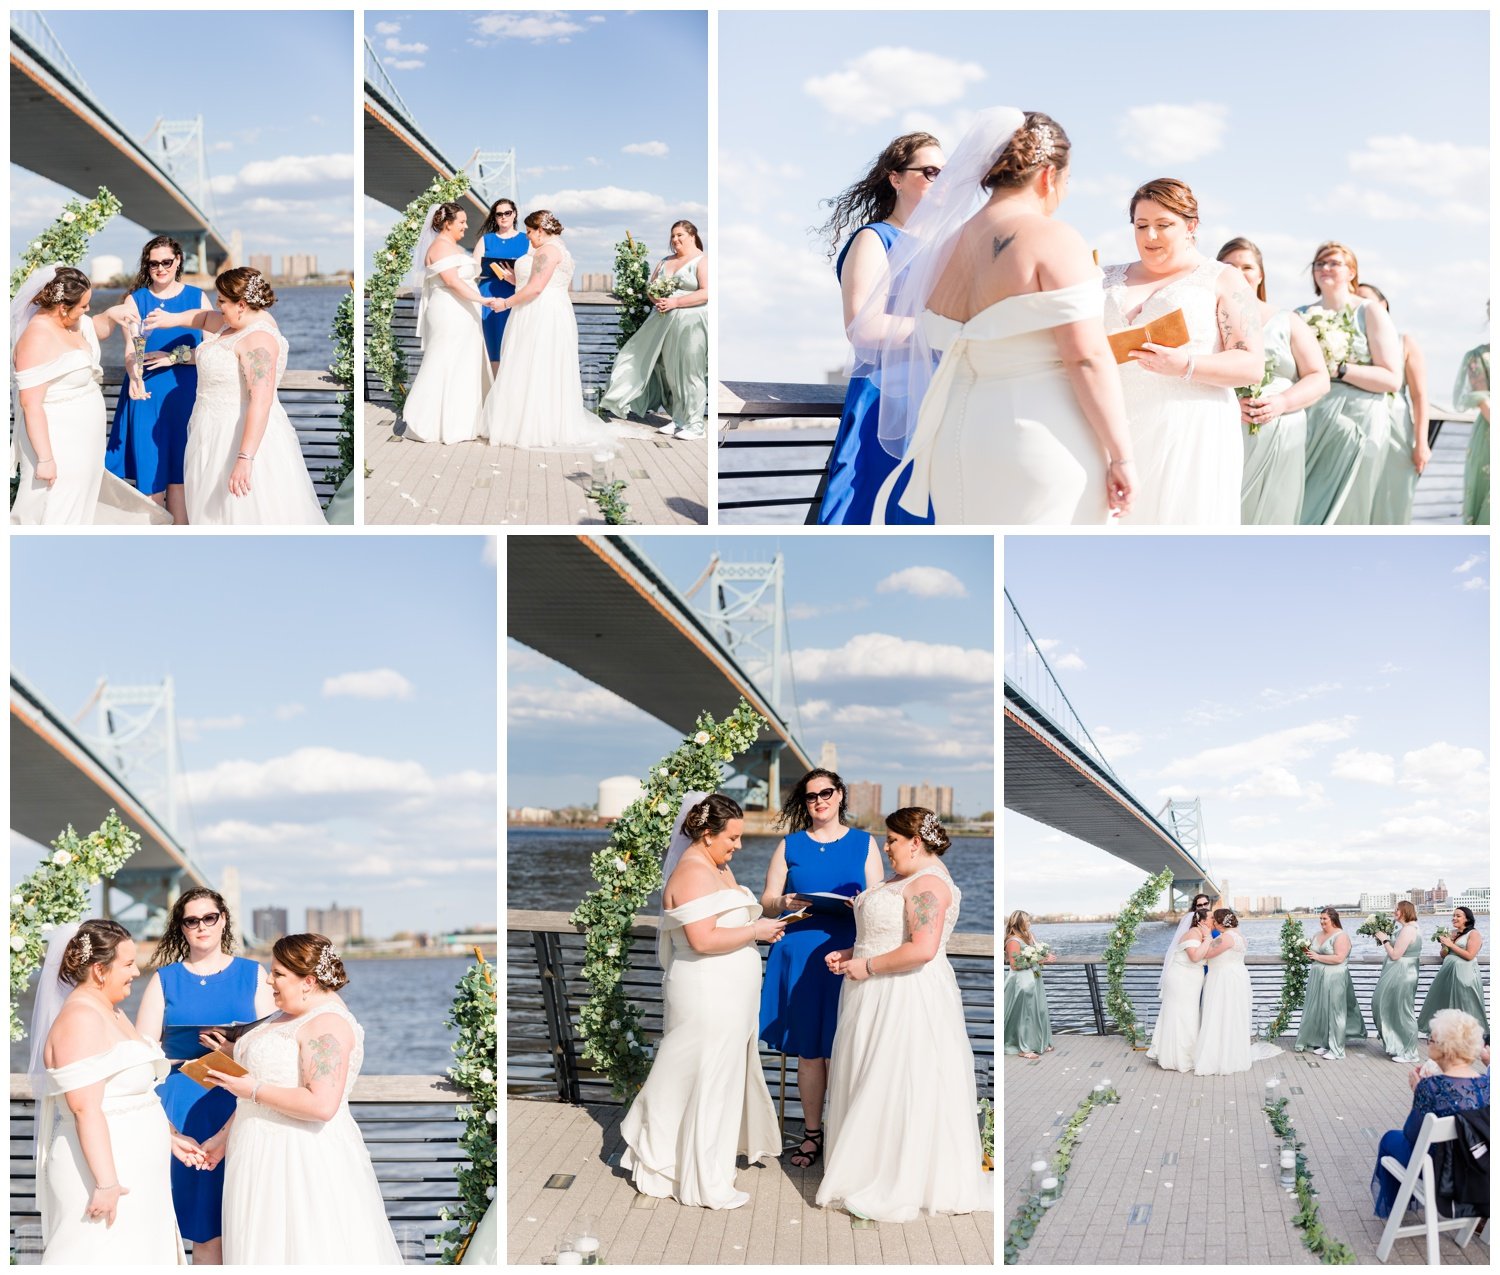 Race-Street-Pier-and-Yards-Brewing-Compnay-Philly-LGBT-Wedding-28.jpg